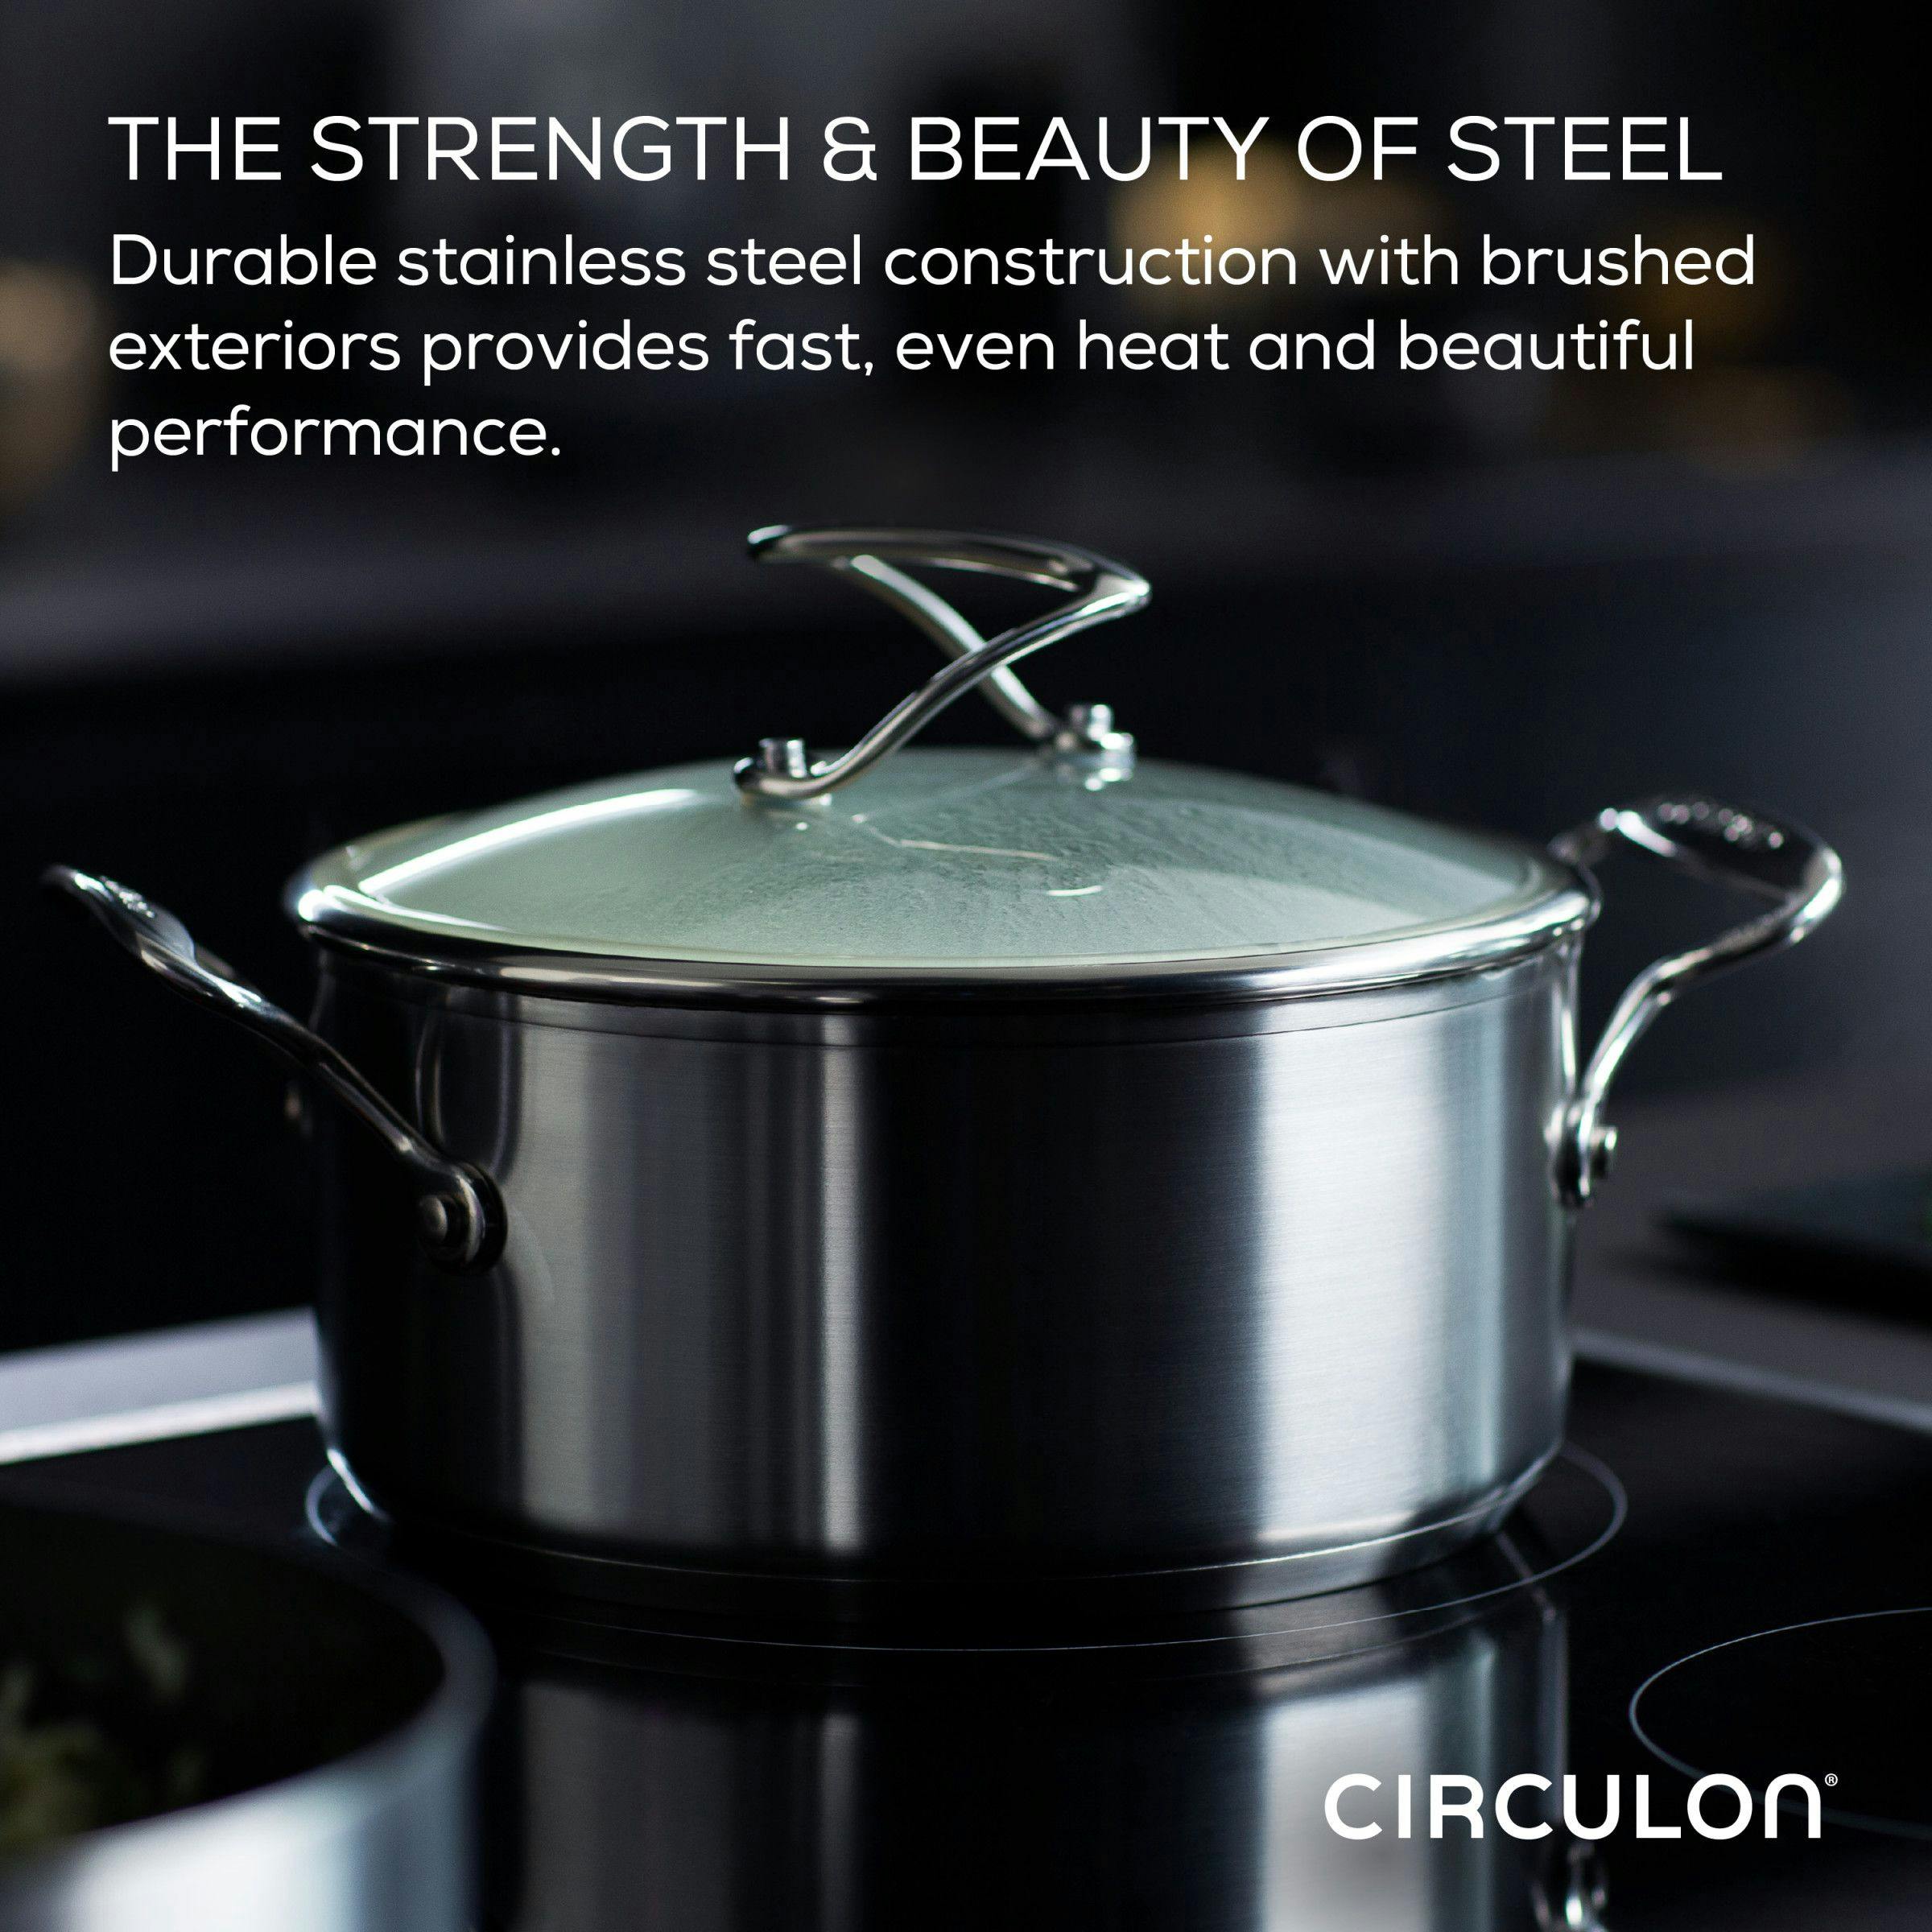 Circulon Stainless Steel Induction Frying Pan with Lid and SteelShield Hybrid Stainless and Nonstick Technology, 12-Inch, Silver